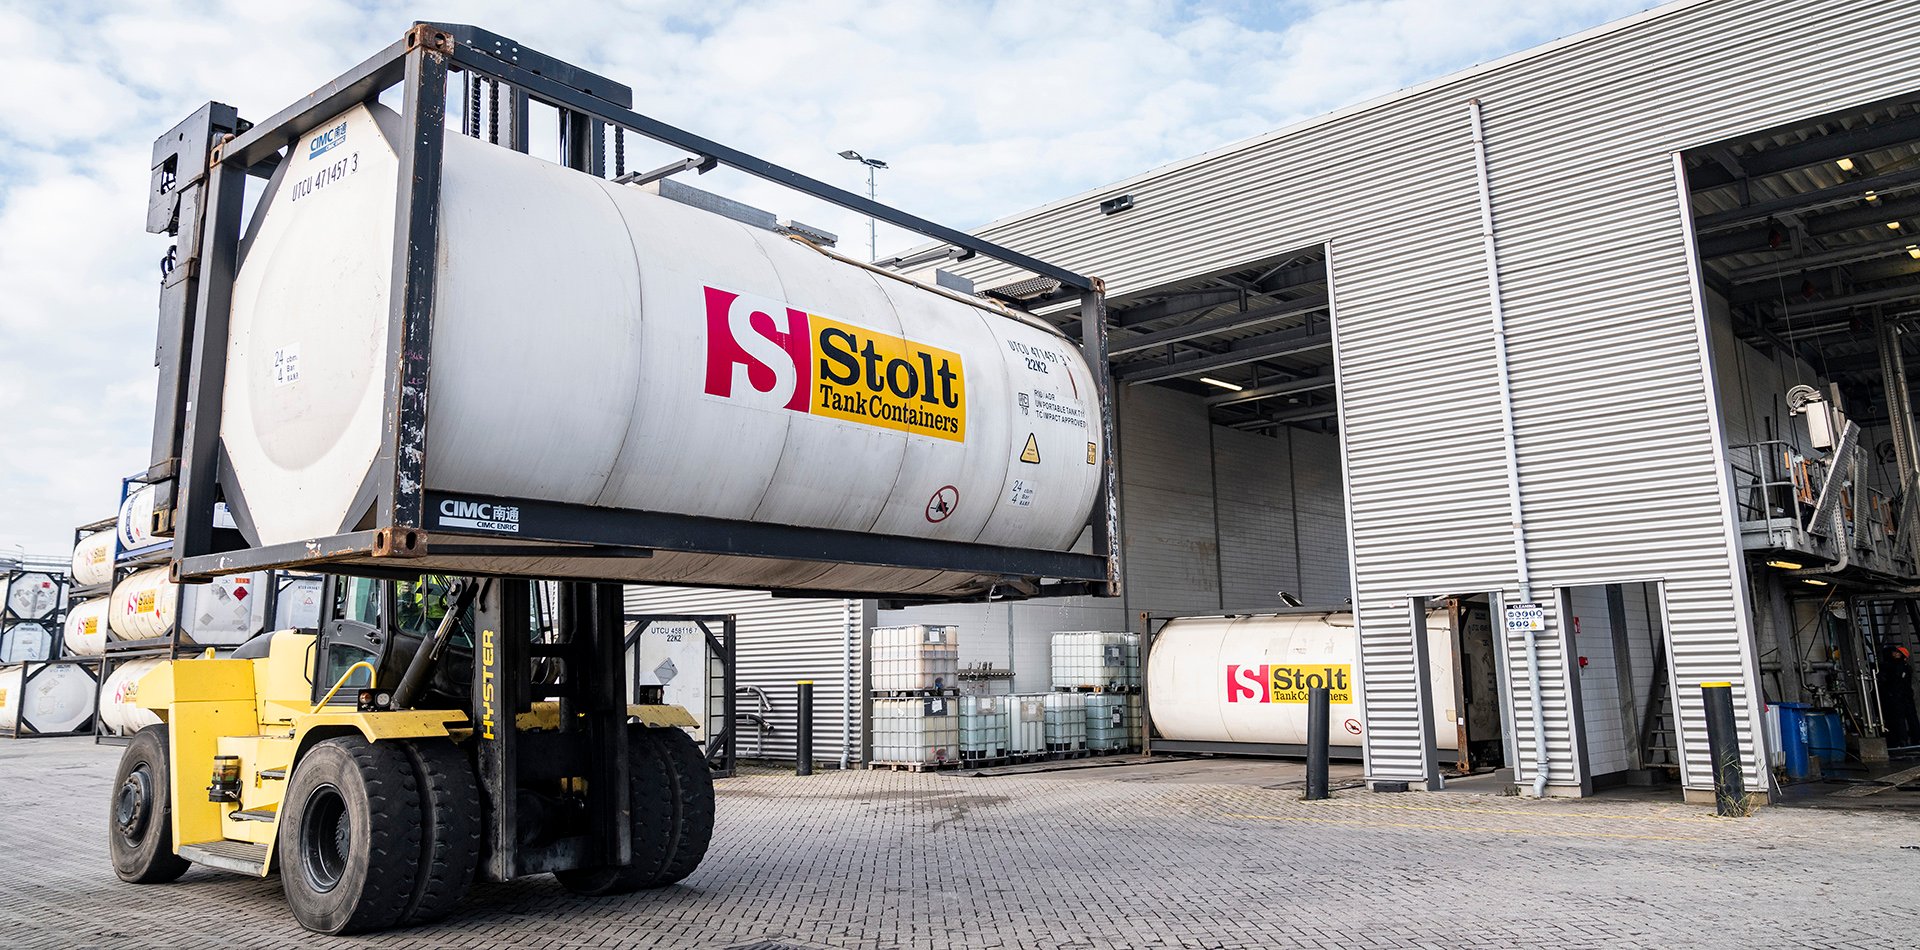 Global depot network of Stolt Tank Containers